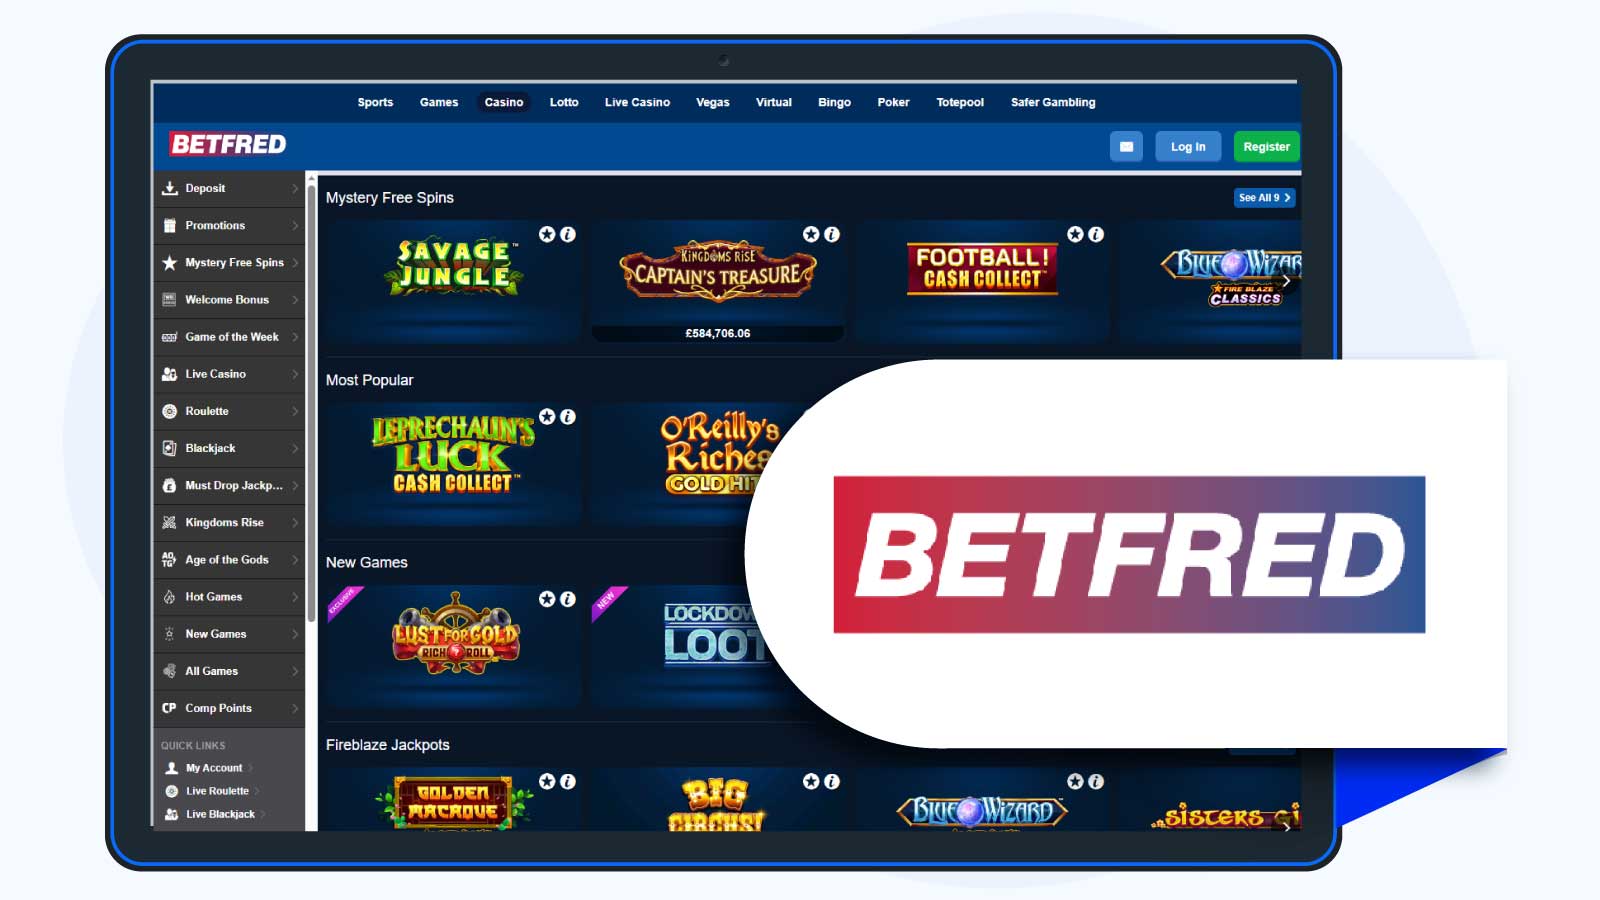 Betfred Casino – Best PayPal Casino for Low-Budget Players